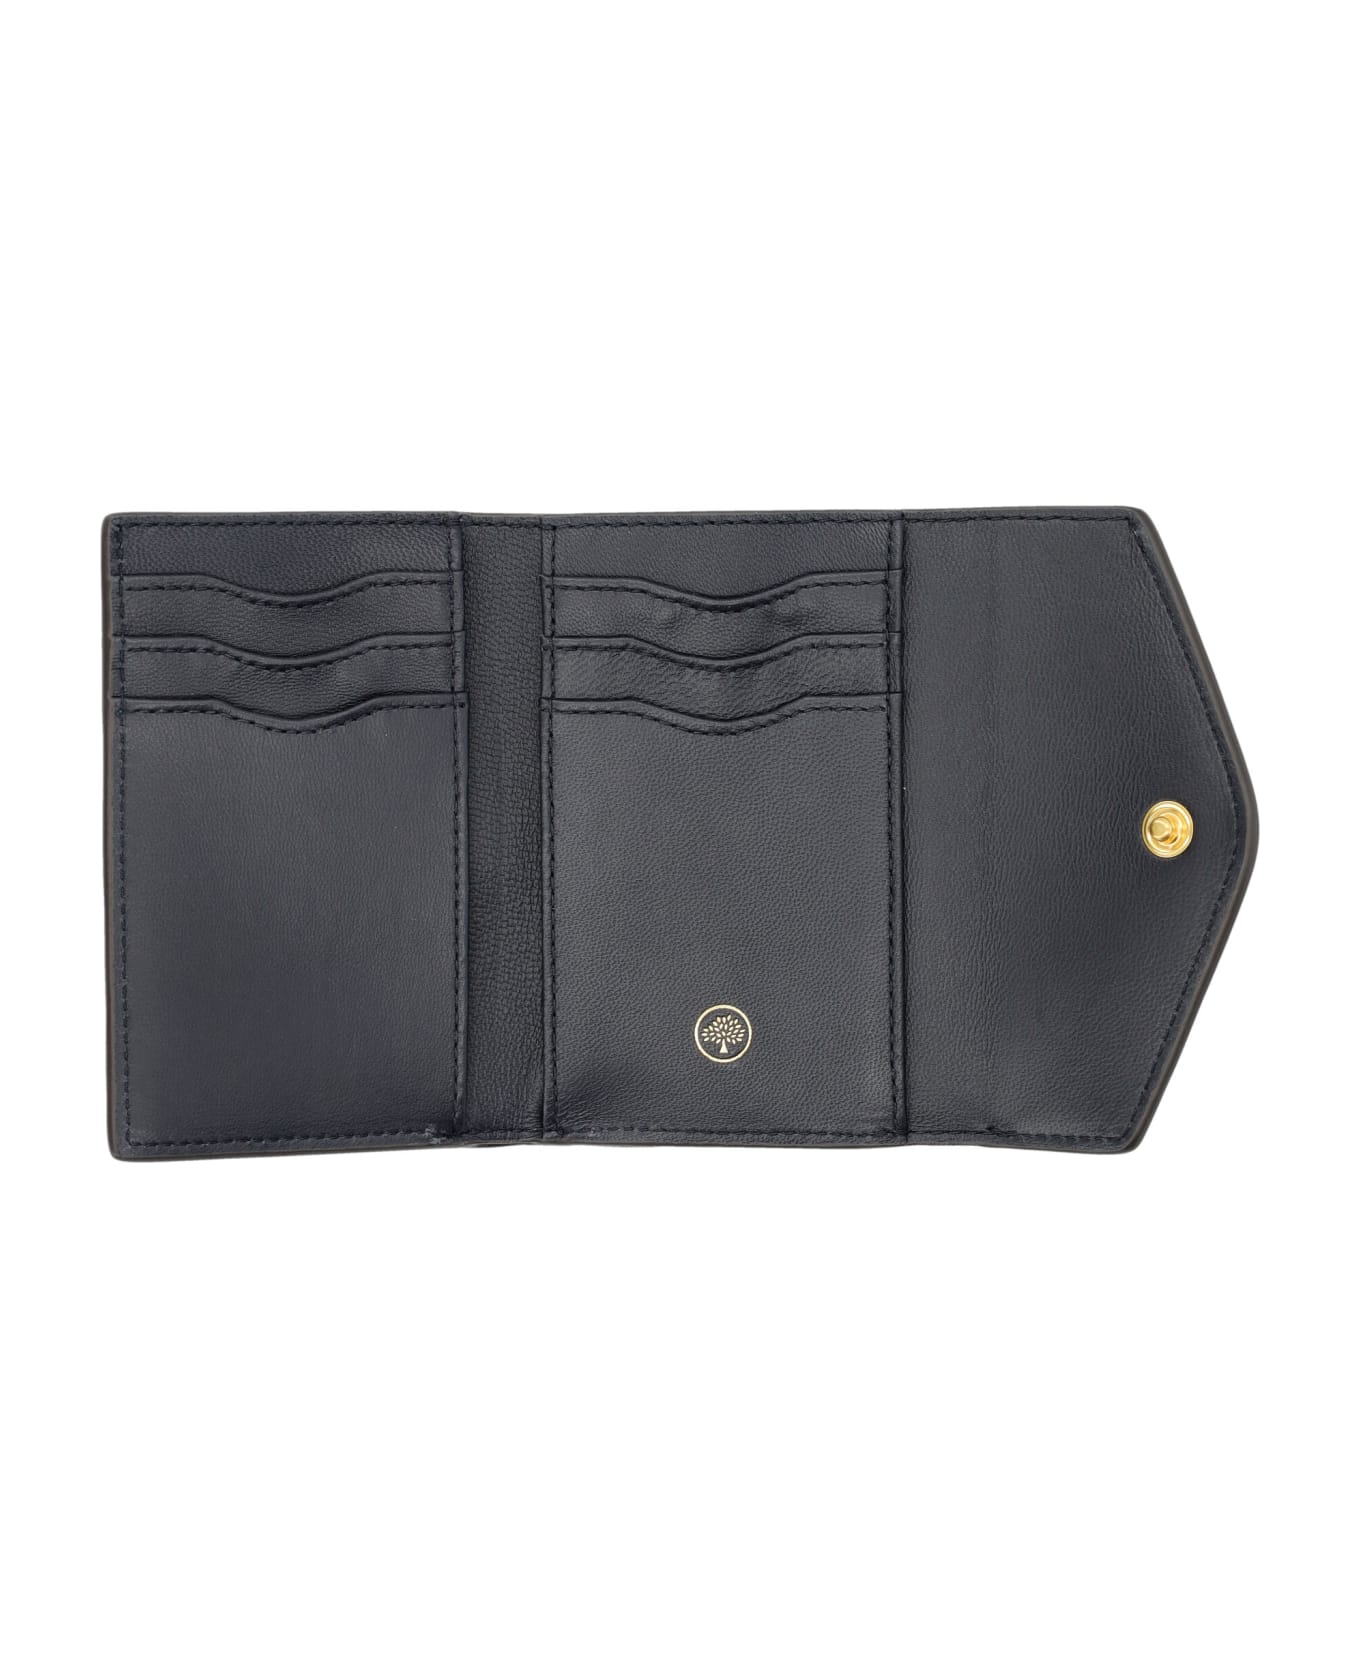 Mulberry Folded Multi-card Wallet - MULBERRY GREEN 財布